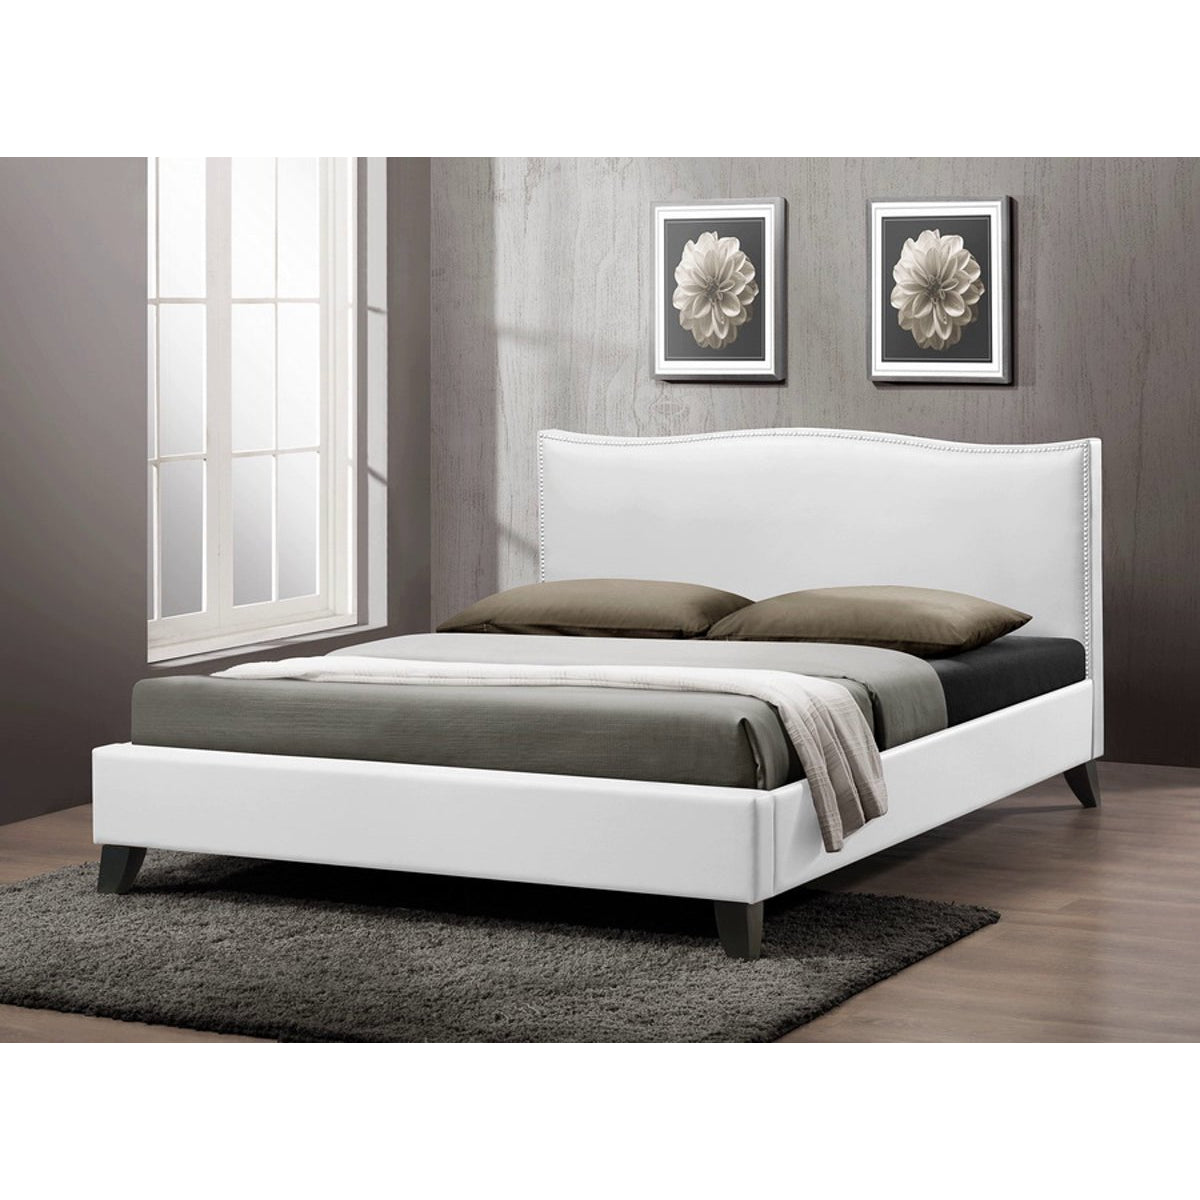 Baxton Studio Battersby White Modern Bed with Upholstered Headboard - Queen Size  Baxton Studio-beds-Minimal And Modern - 1